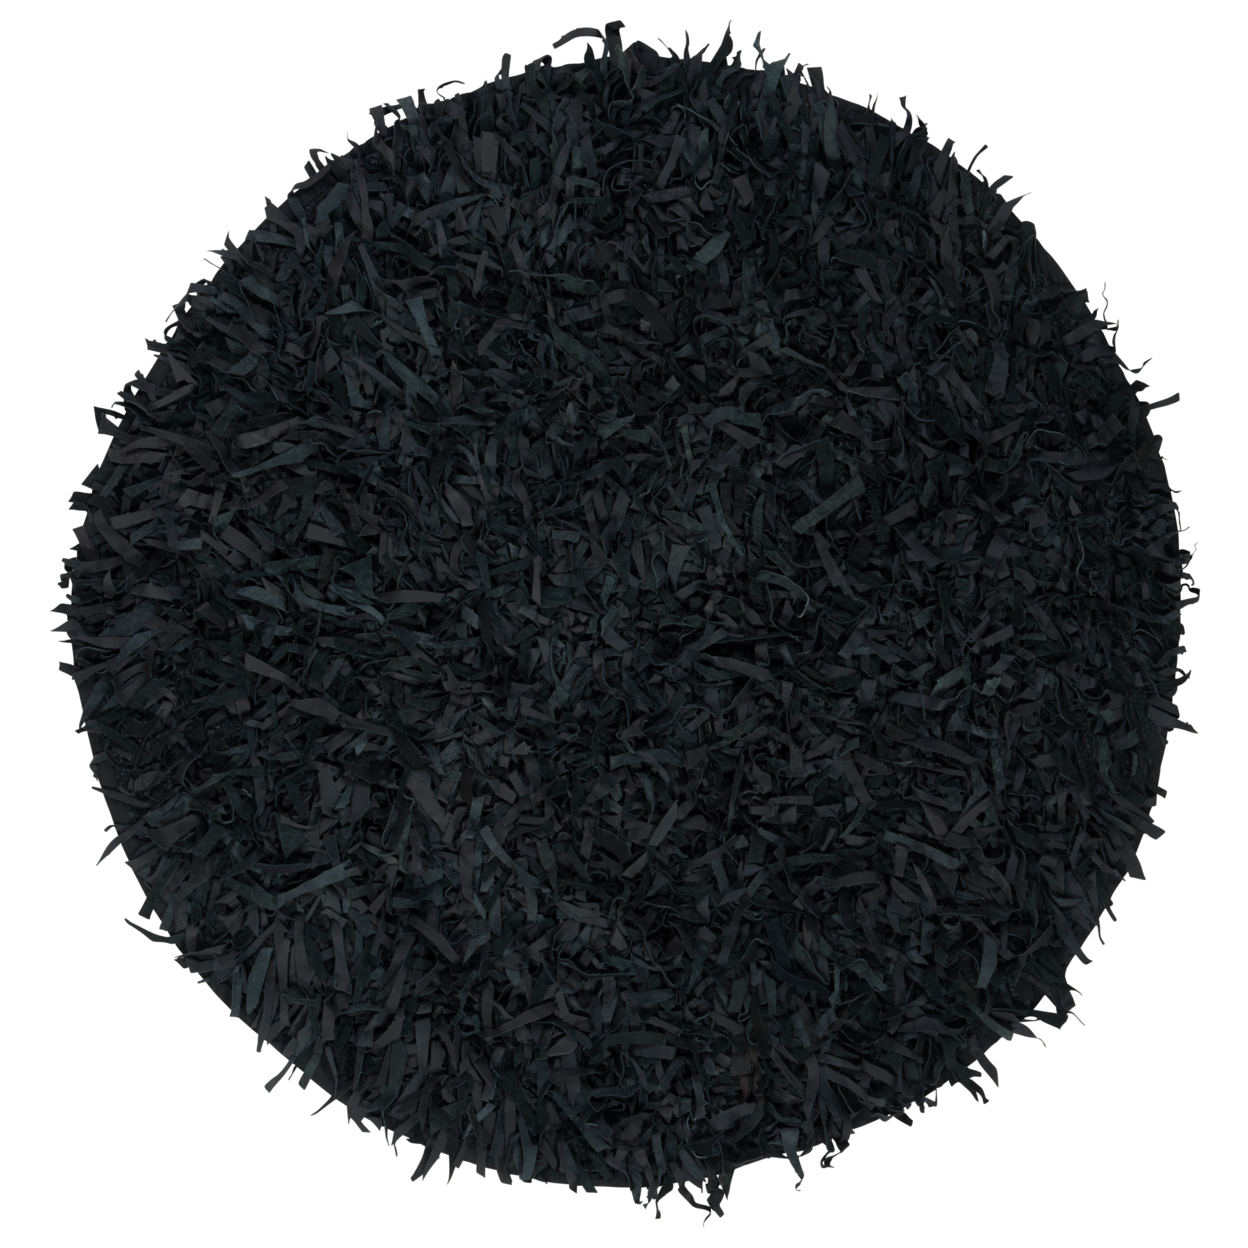 SAFAVIEH Leather Shag LSG601A Hand-knotted Black Rug - 5' Round